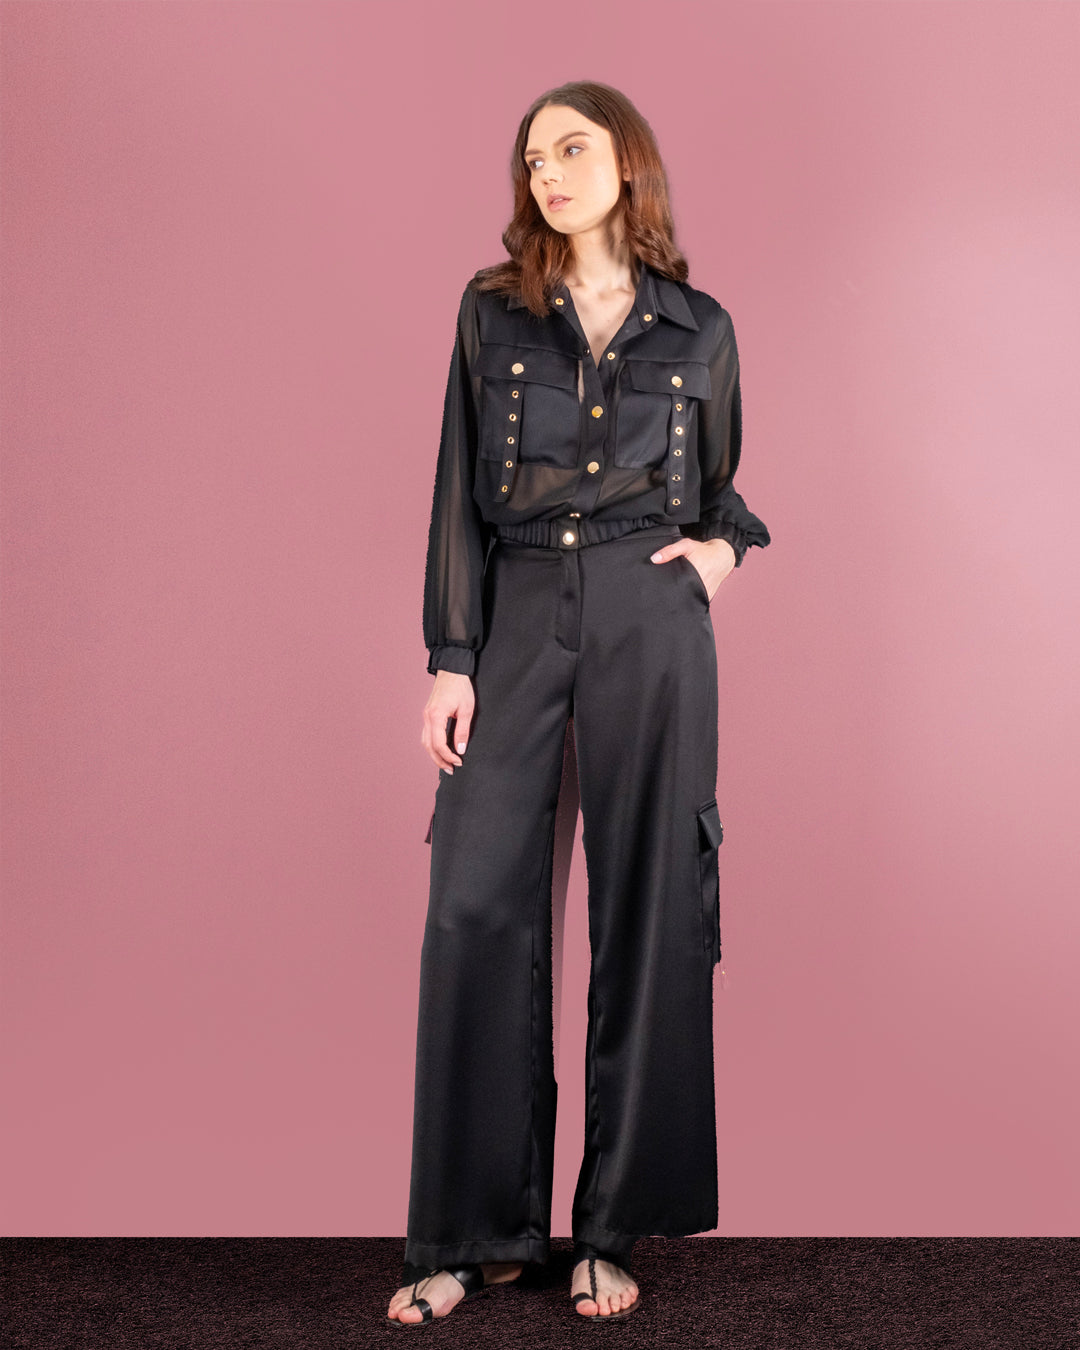 Jacket-Trousers Set with Snaps on the Front and Elastic Waist and Sleeves